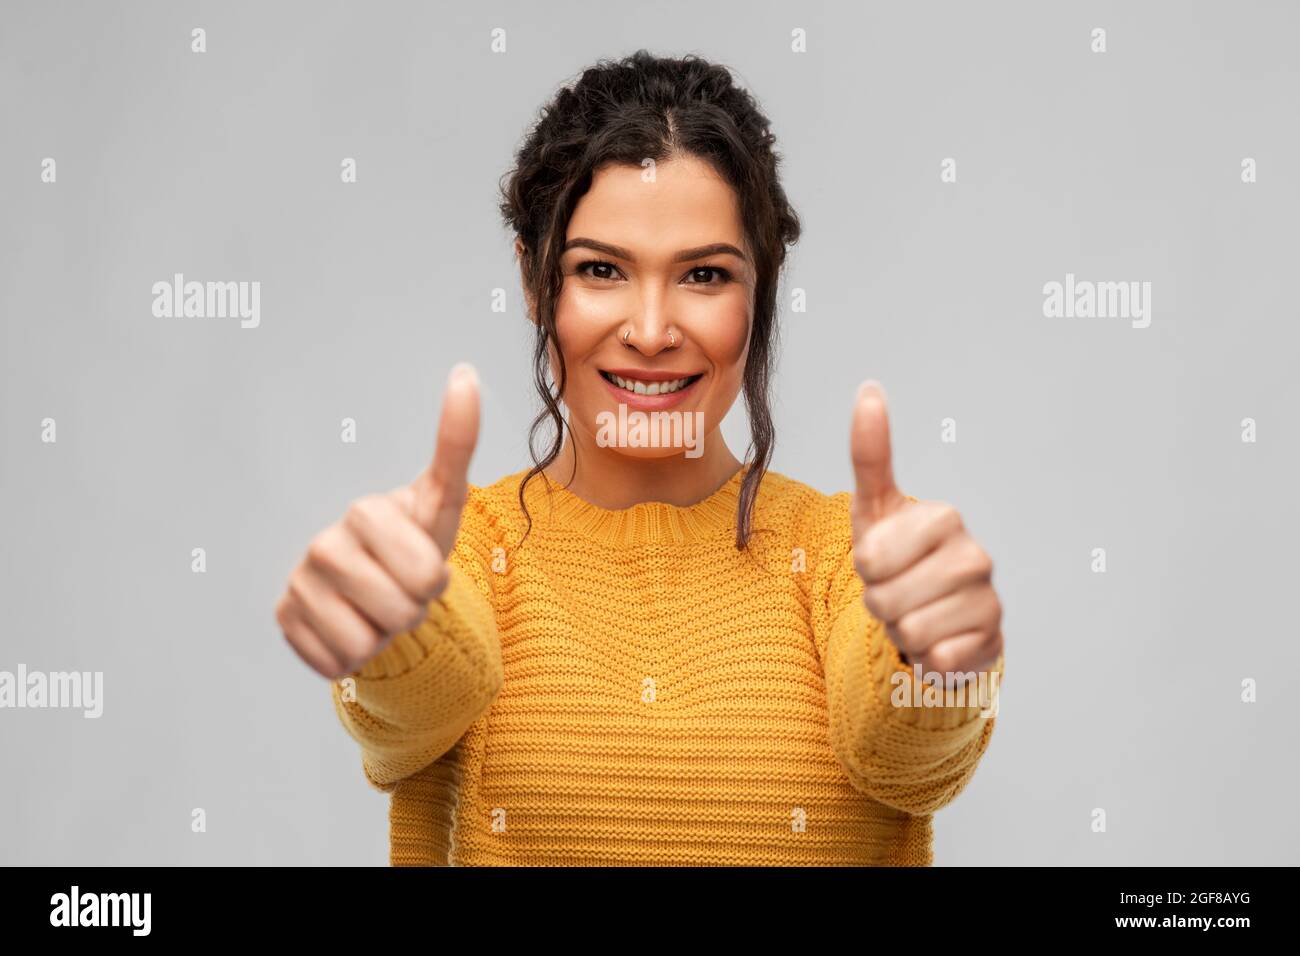 happy smiling young woman showing thumbs up Stock Photo